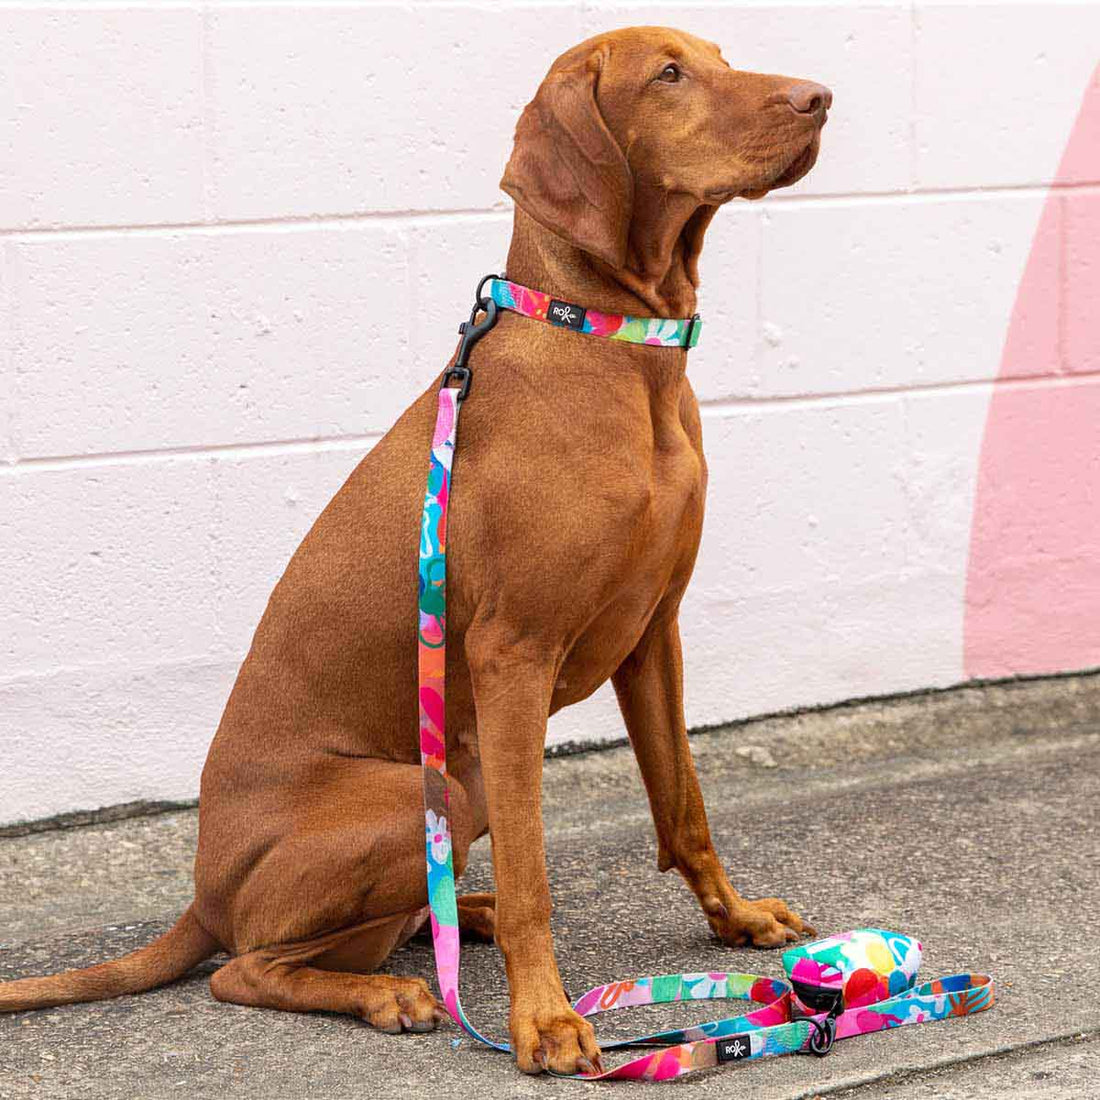 RO x Steph Chapman Edible Blooms Dog Leash (Sml Only)